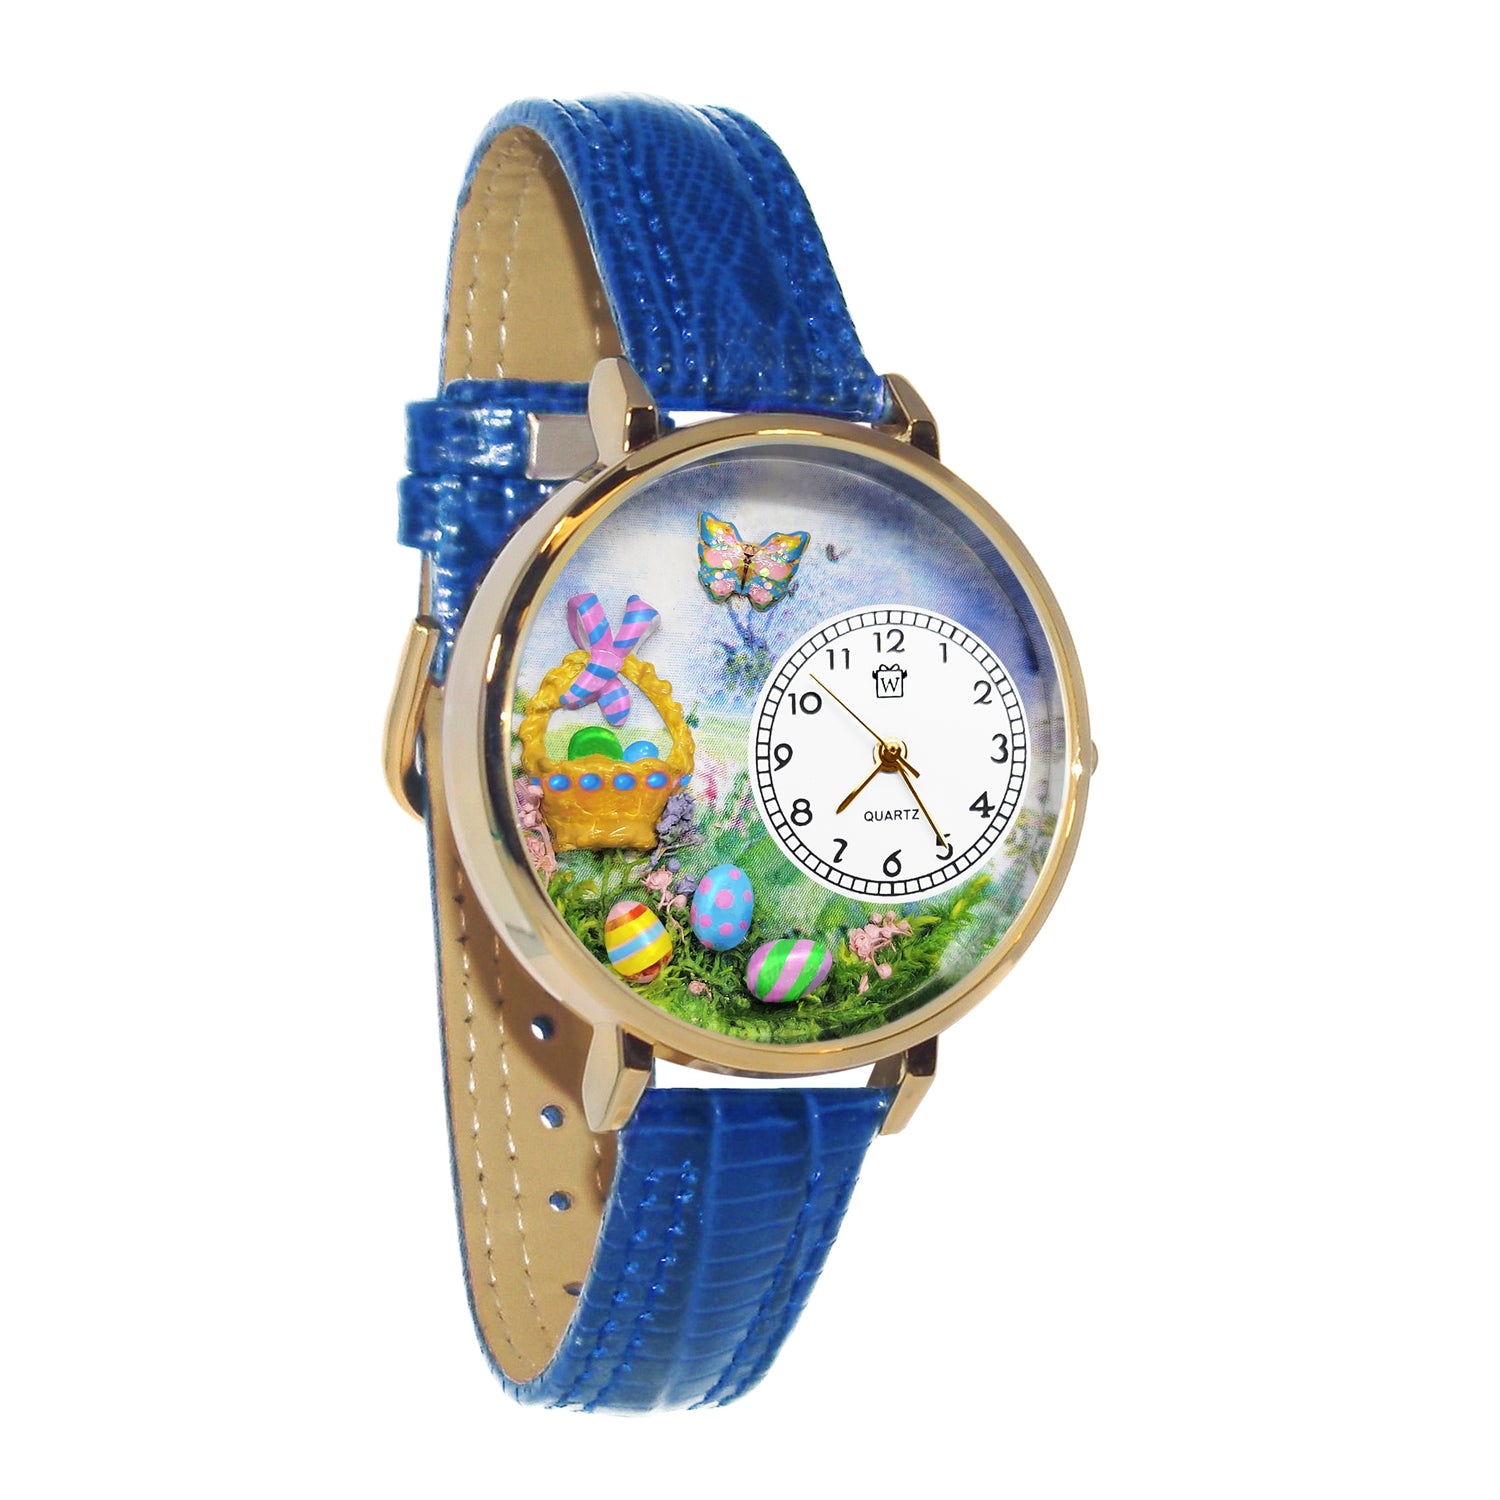 Whimsical Gifts | Easter Basket 3D Watch Large Style | Handmade in USA | Holiday & Seasonal Themed | Easter | Novelty Unique Fun Miniatures Gift | Gold Finish Royal Blue Leather Watch Band